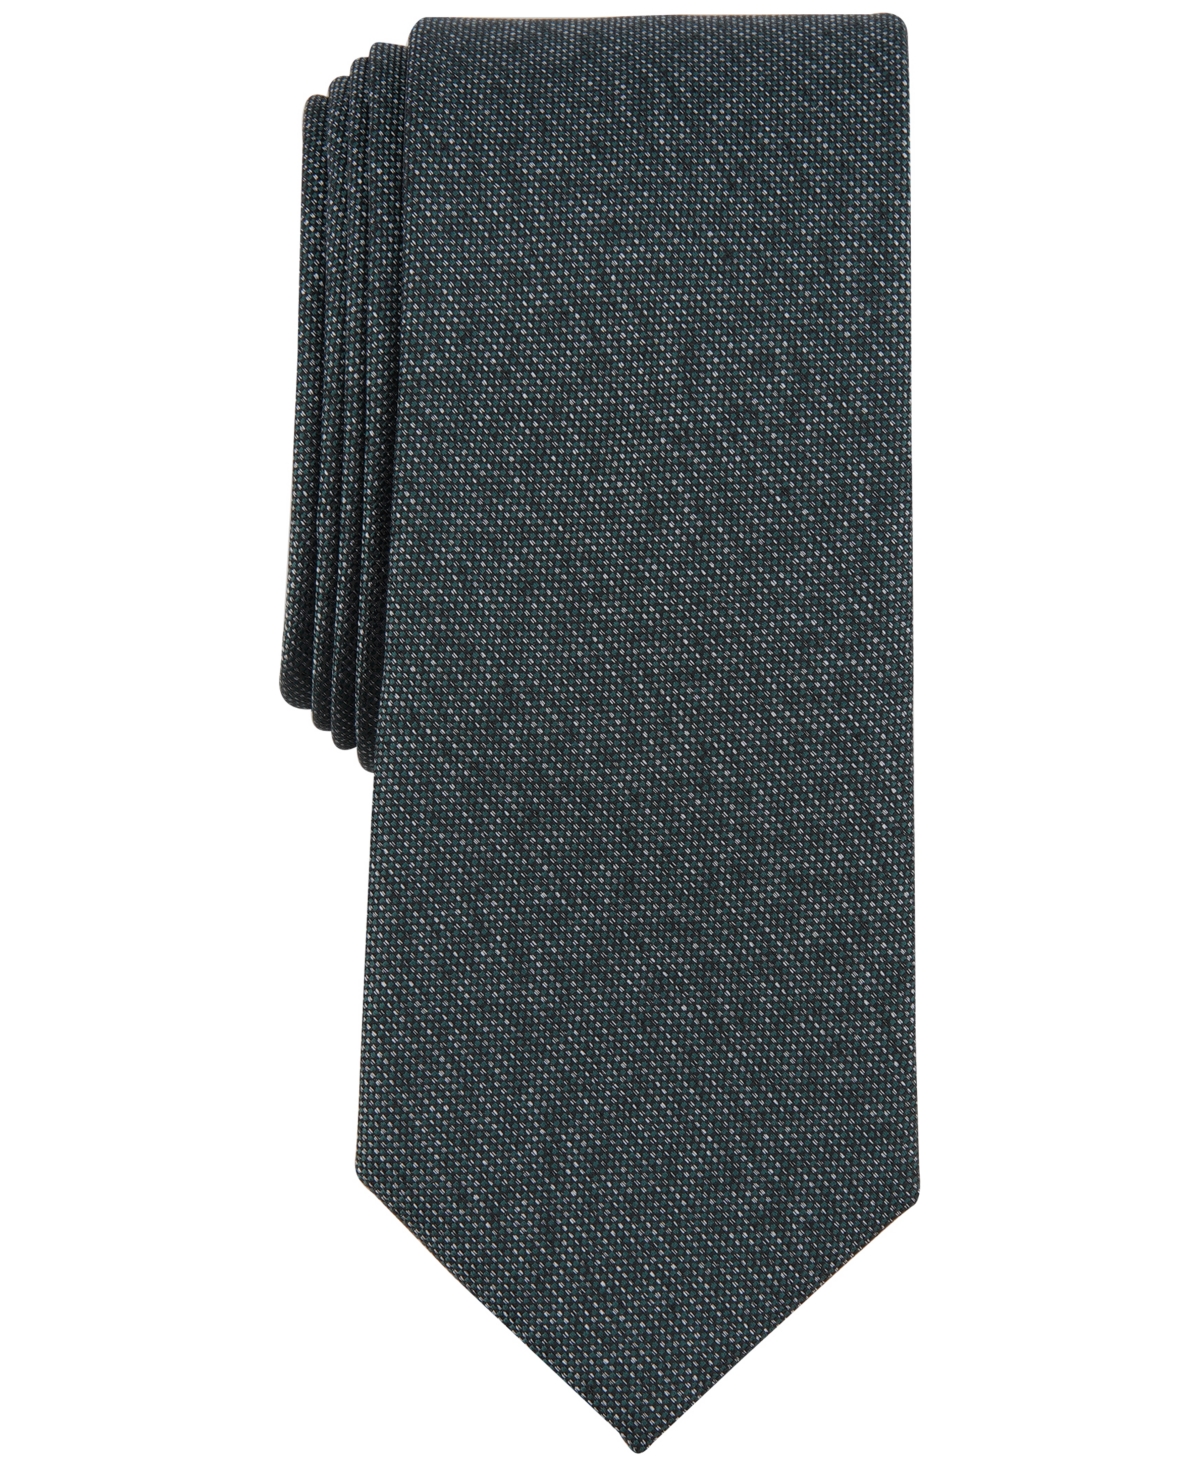 Men's Cobbled Solid Tie, Created for Macy's - Mauve